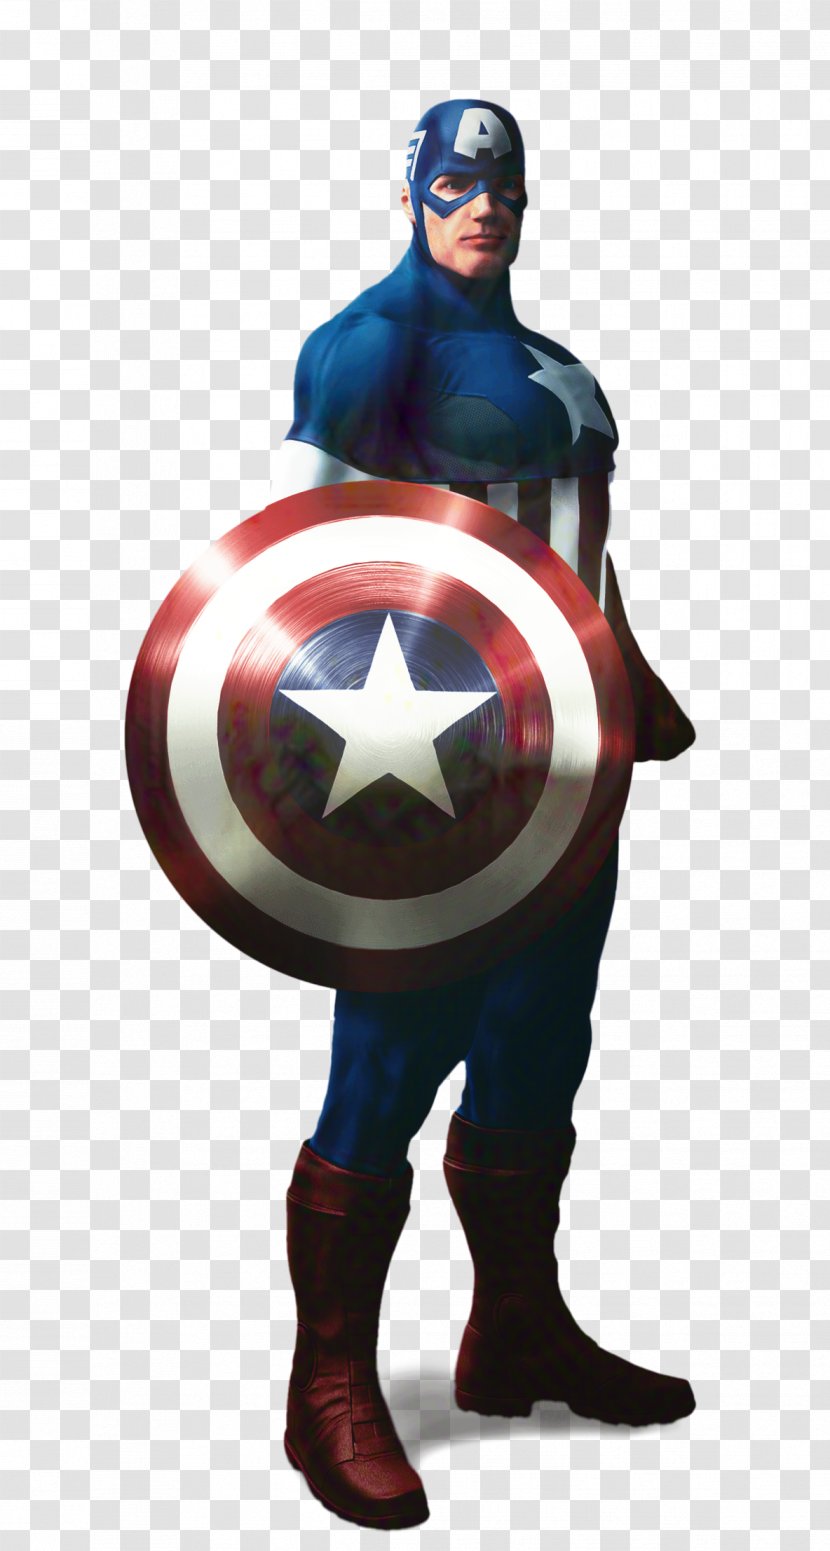 Captain America: The First Avenger - Avengers - Fictional Character Transparent PNG